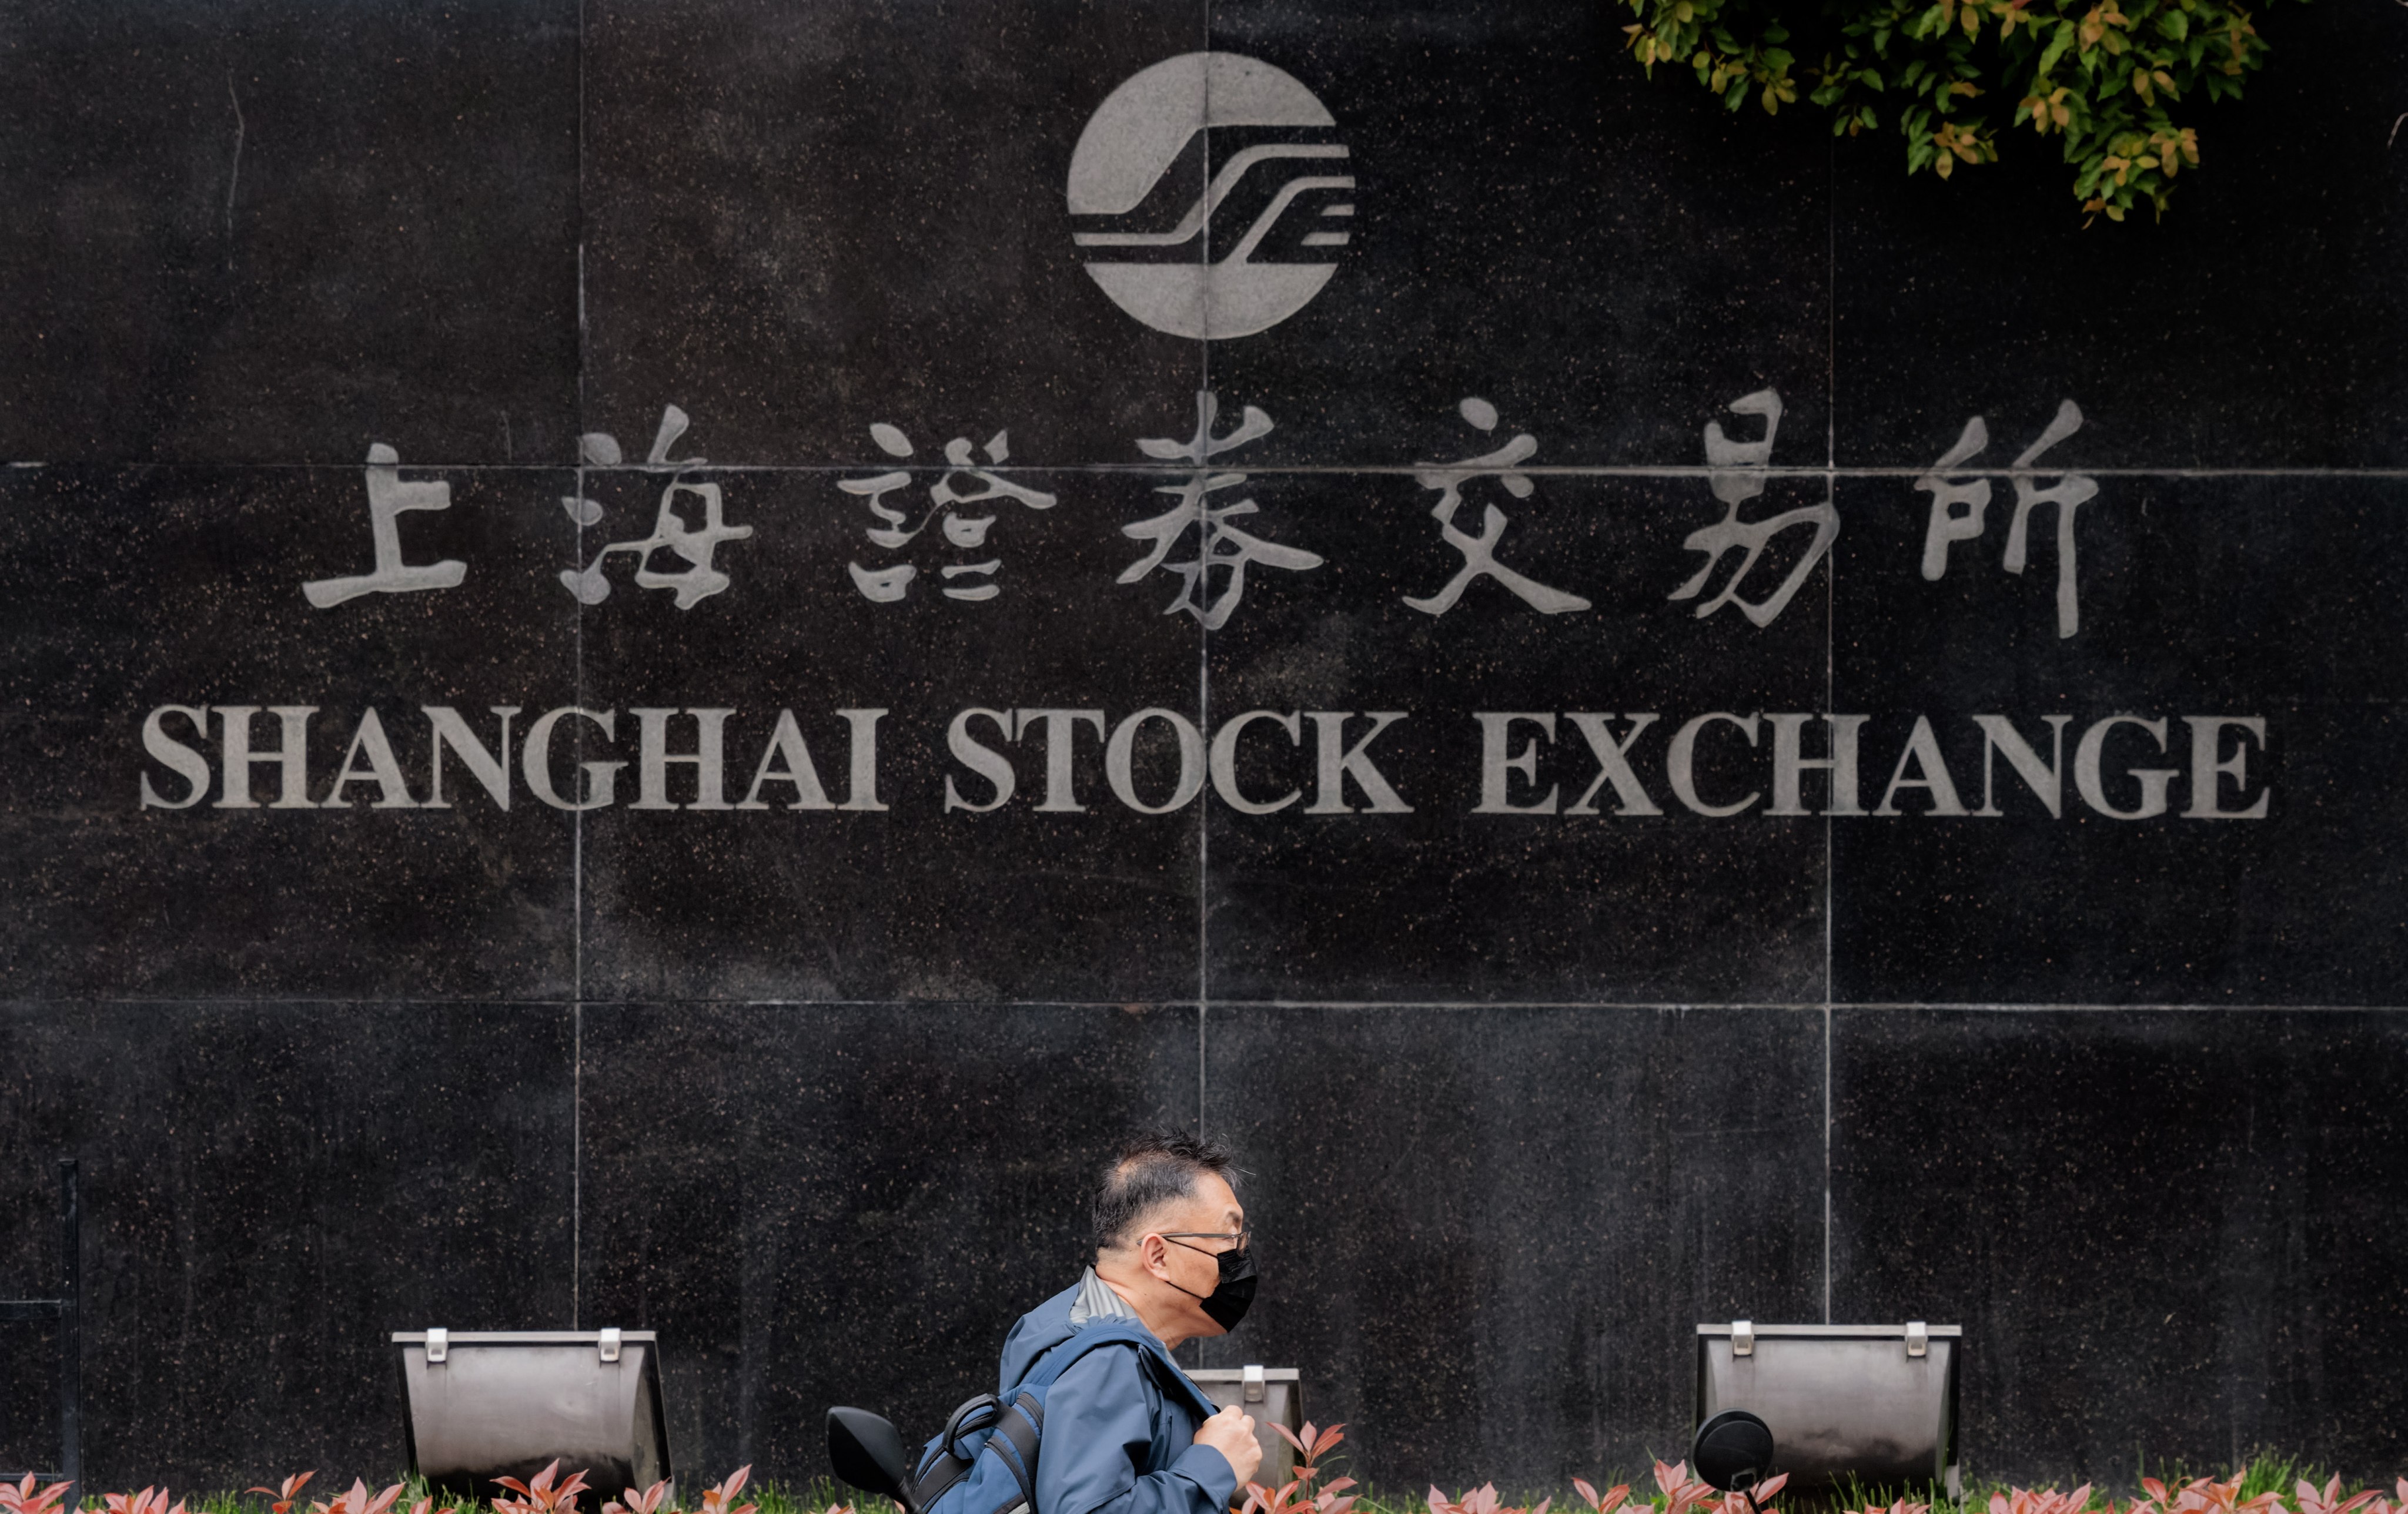 The entrance of the Shanghai Stock Exchange building in Shanghai on 3 April 2023. Photo: EPA-EFE